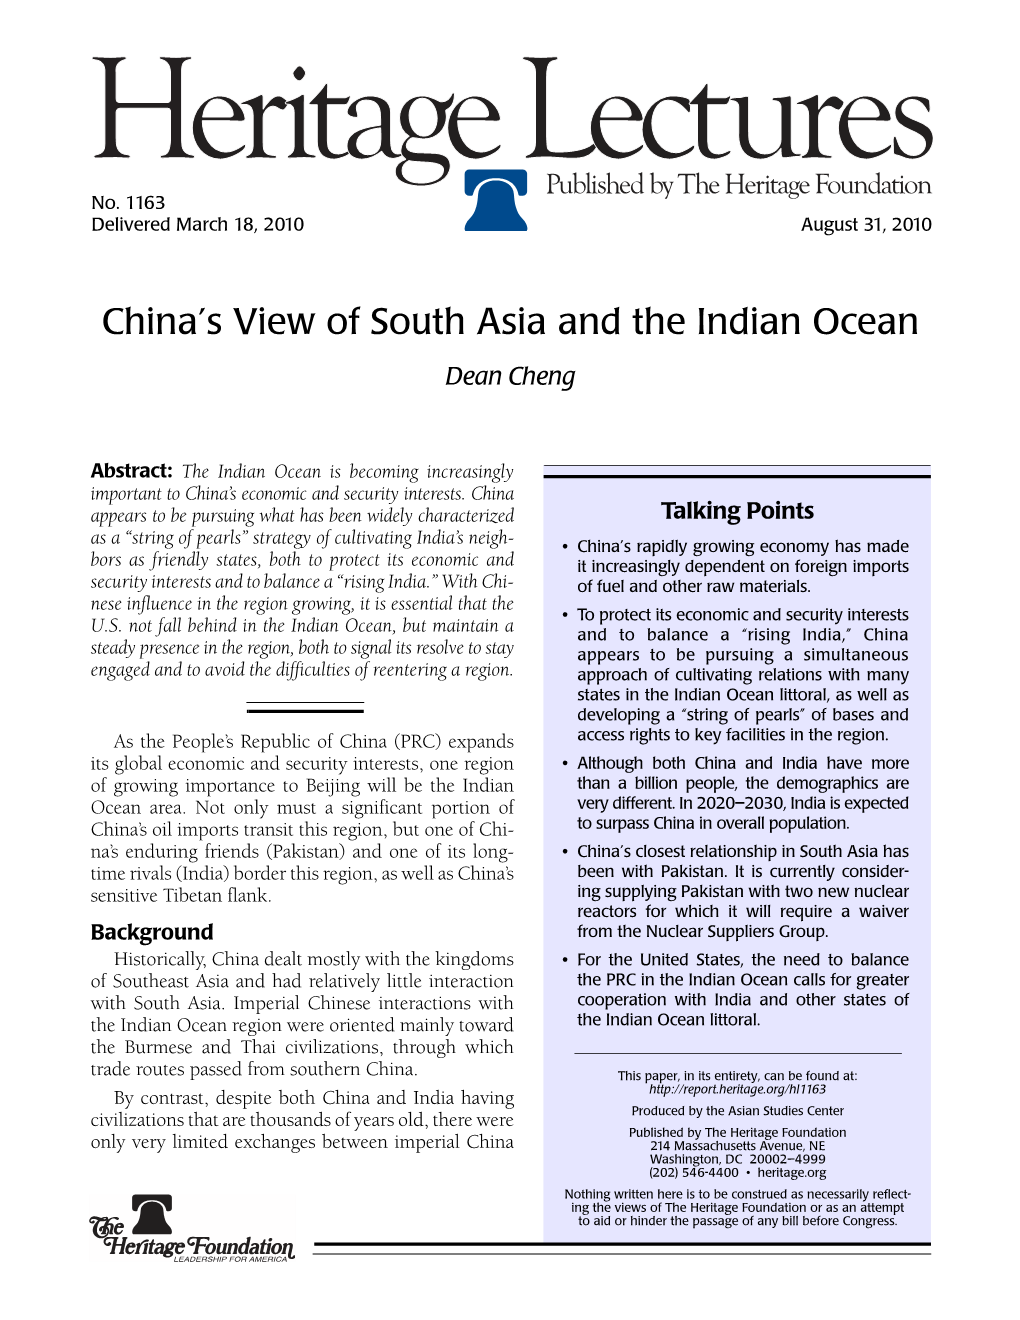 China's View of South Asia and the Indian Ocean